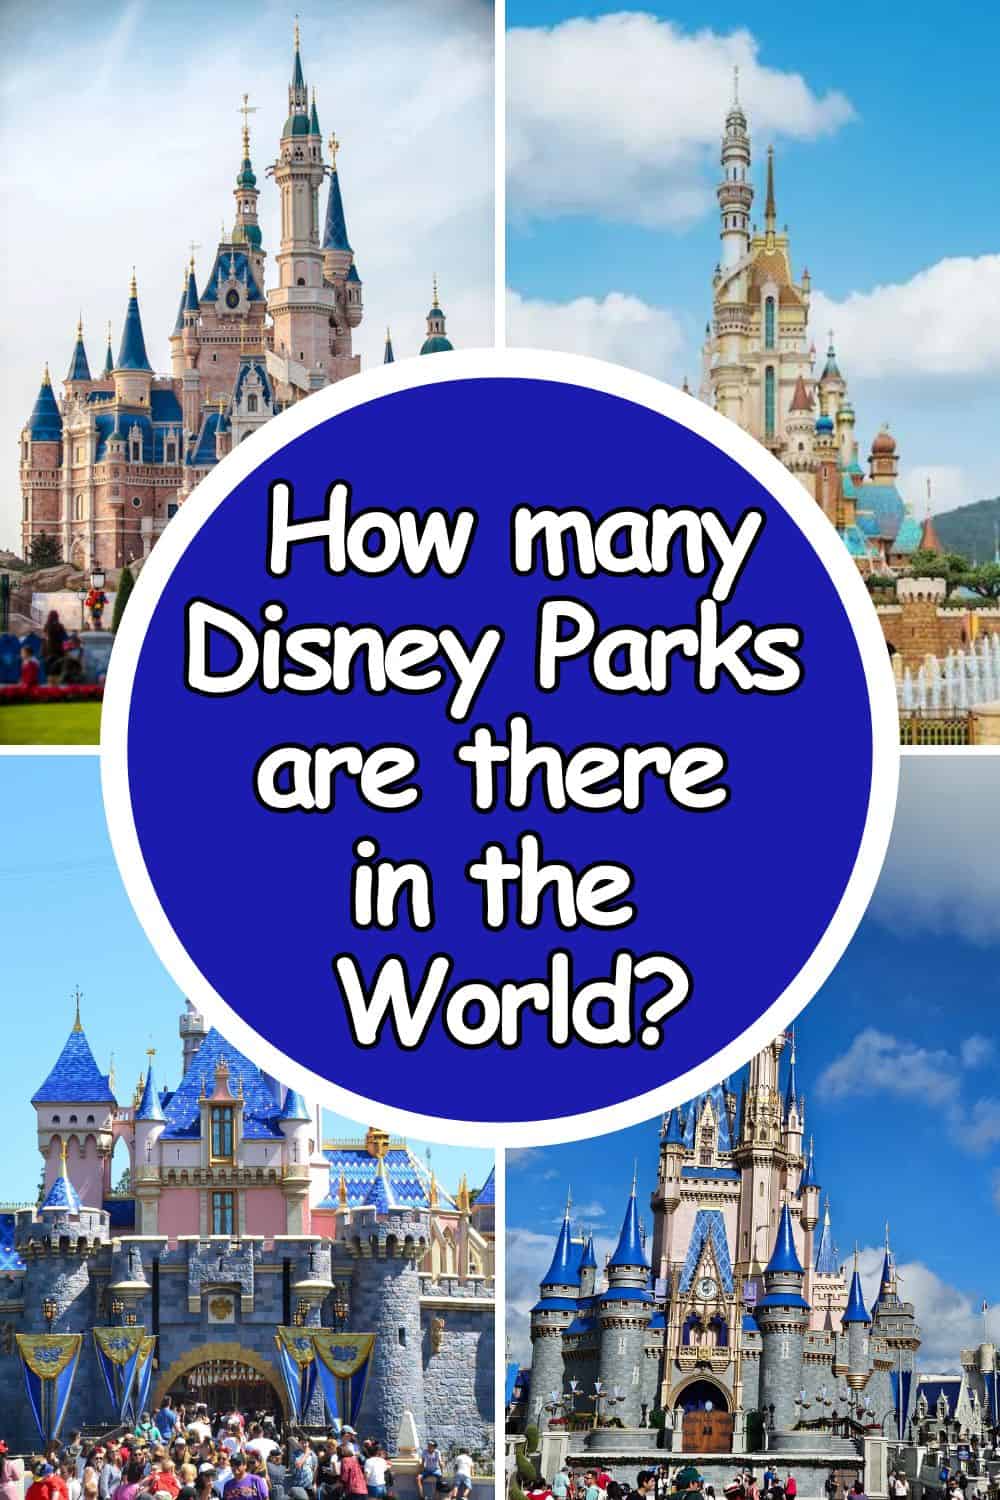 How many Disney Parks are there in the World?